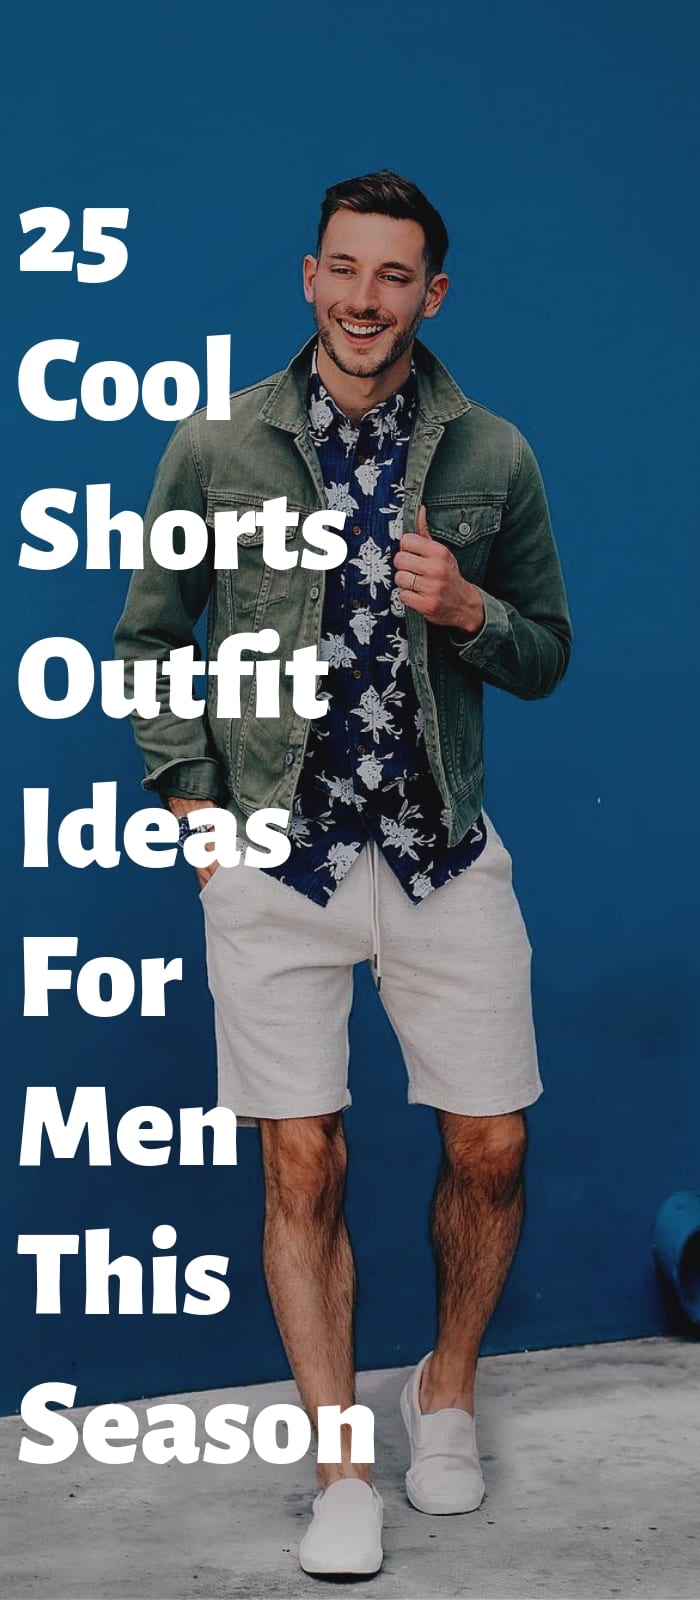 25 Cool Shorts Outfit Ideas For Men This Season